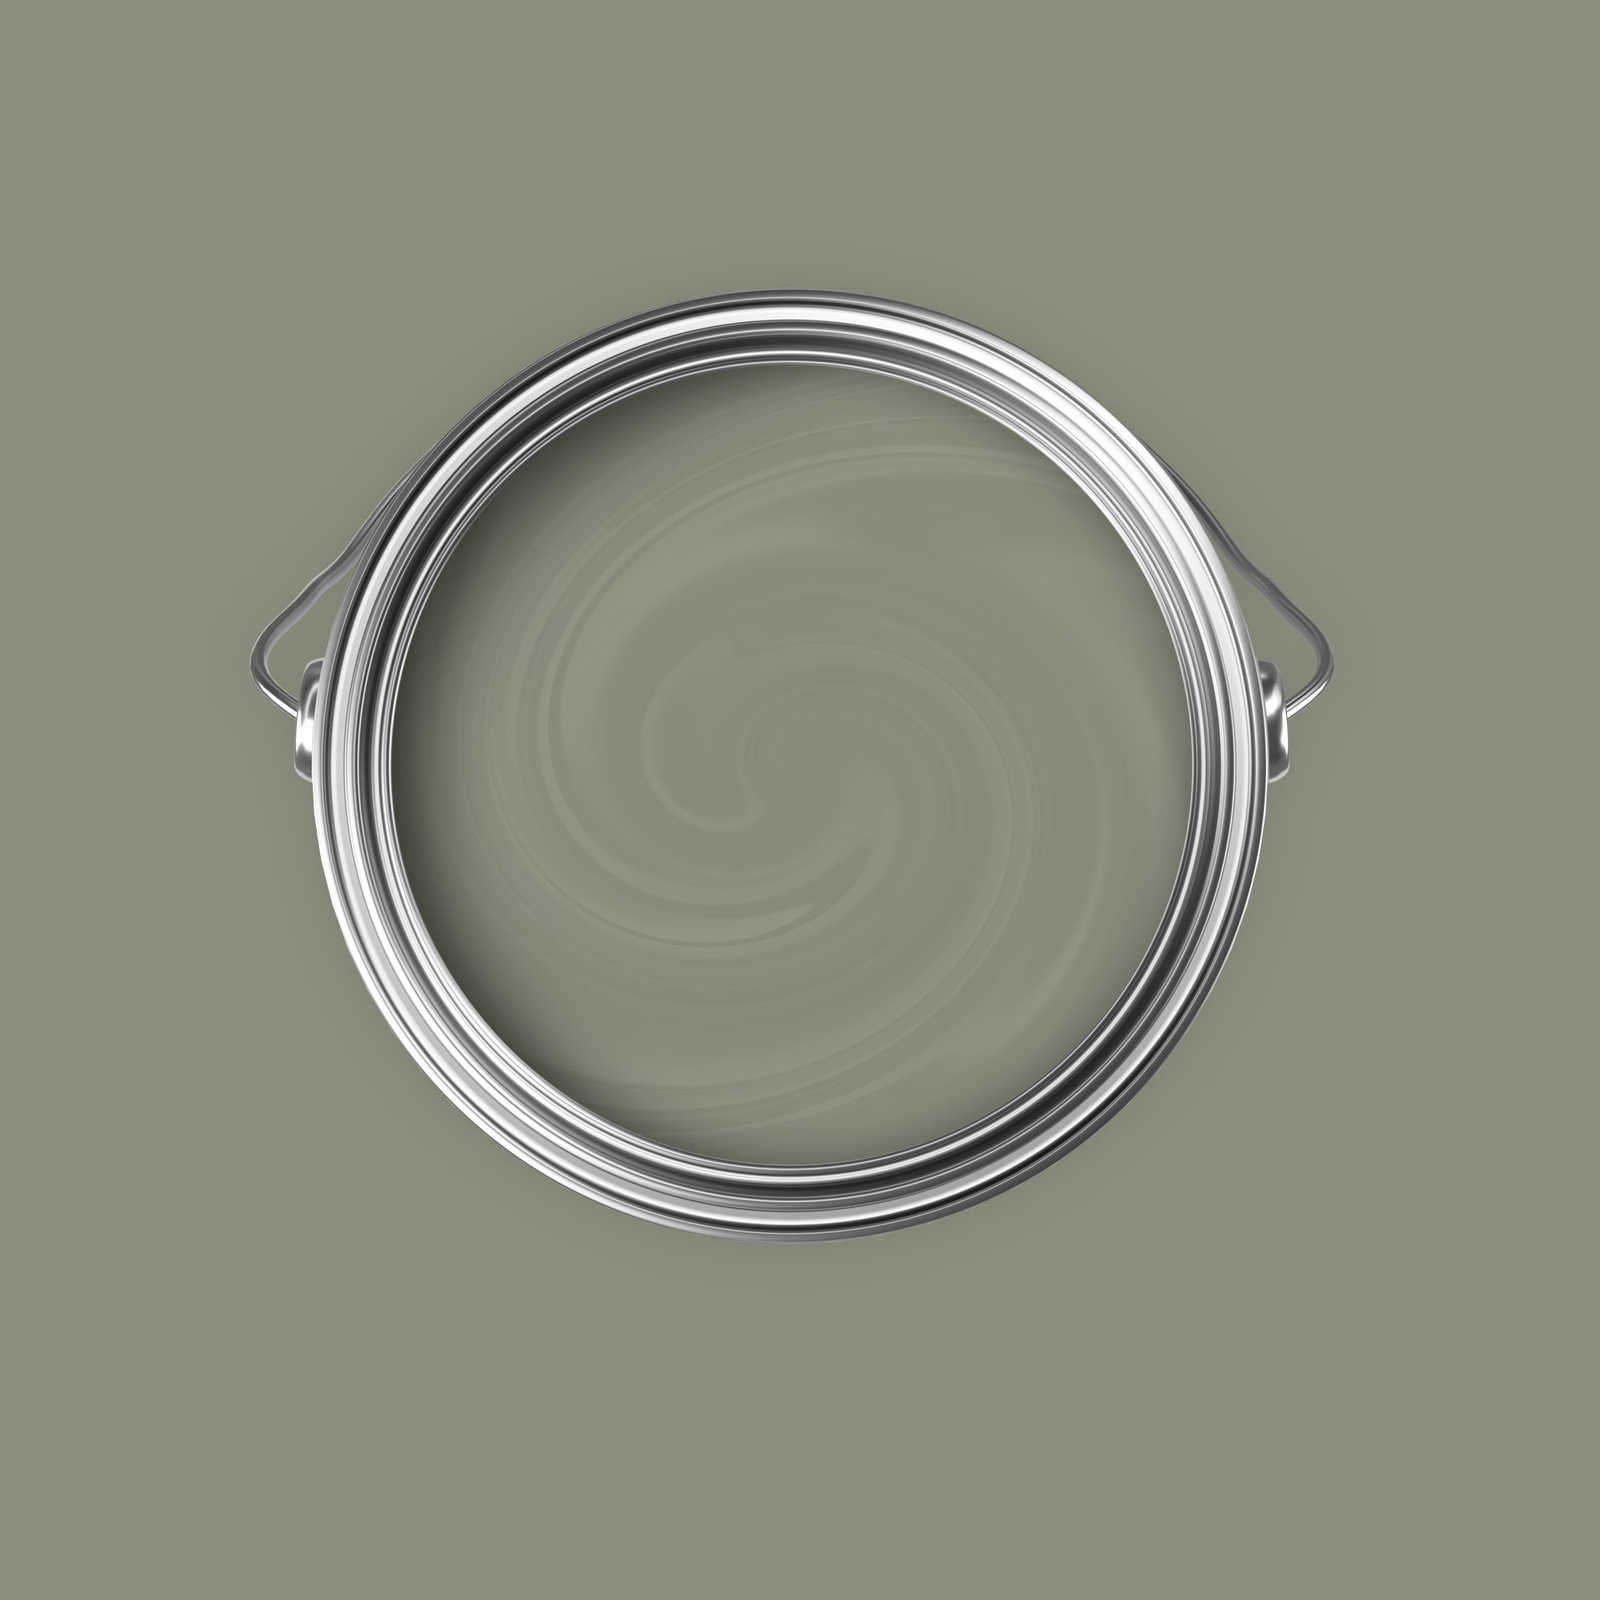             Premium Wall Paint Persuasive Olive Green »Talented calm taupe« NW706 – 5 litre
        